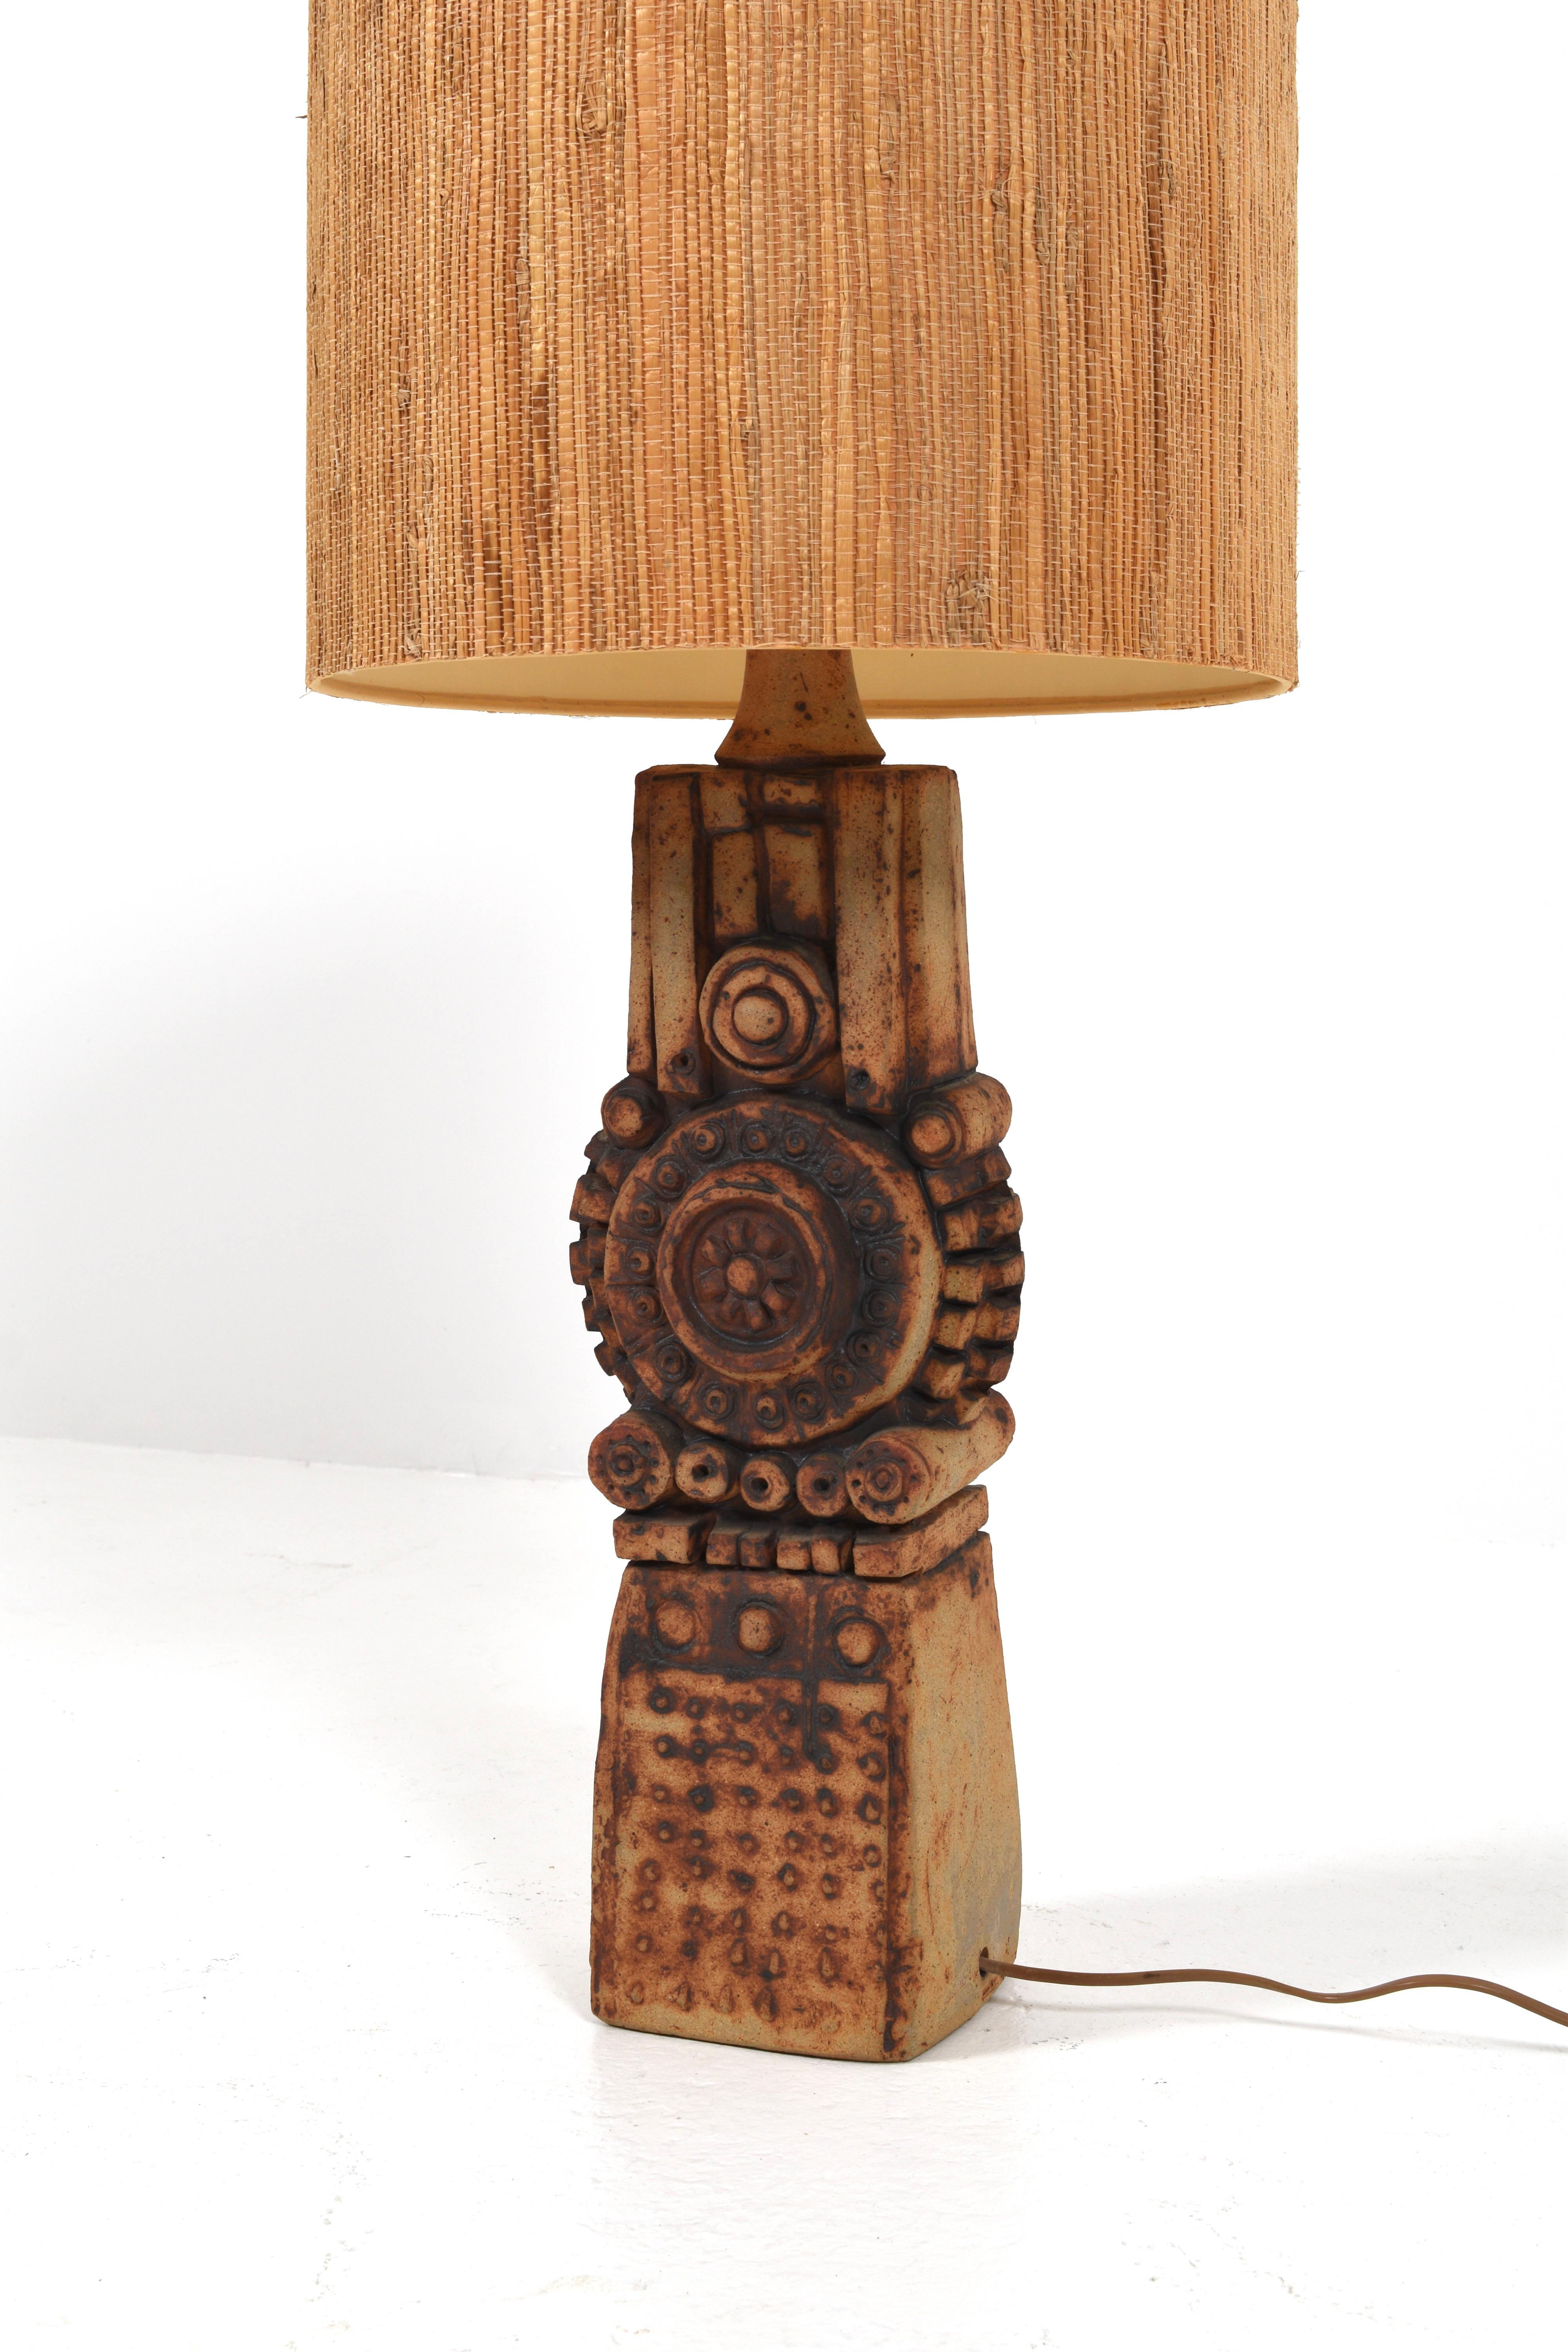 The Totem Table Lamp by Bernard Rooke, crafted in the 1970s, is a striking embodiment of artistic ingenuity and functional design. Created within the confines of Studio Stoneware, this lamp is a testament to Rooke's mastery of ceramics and his